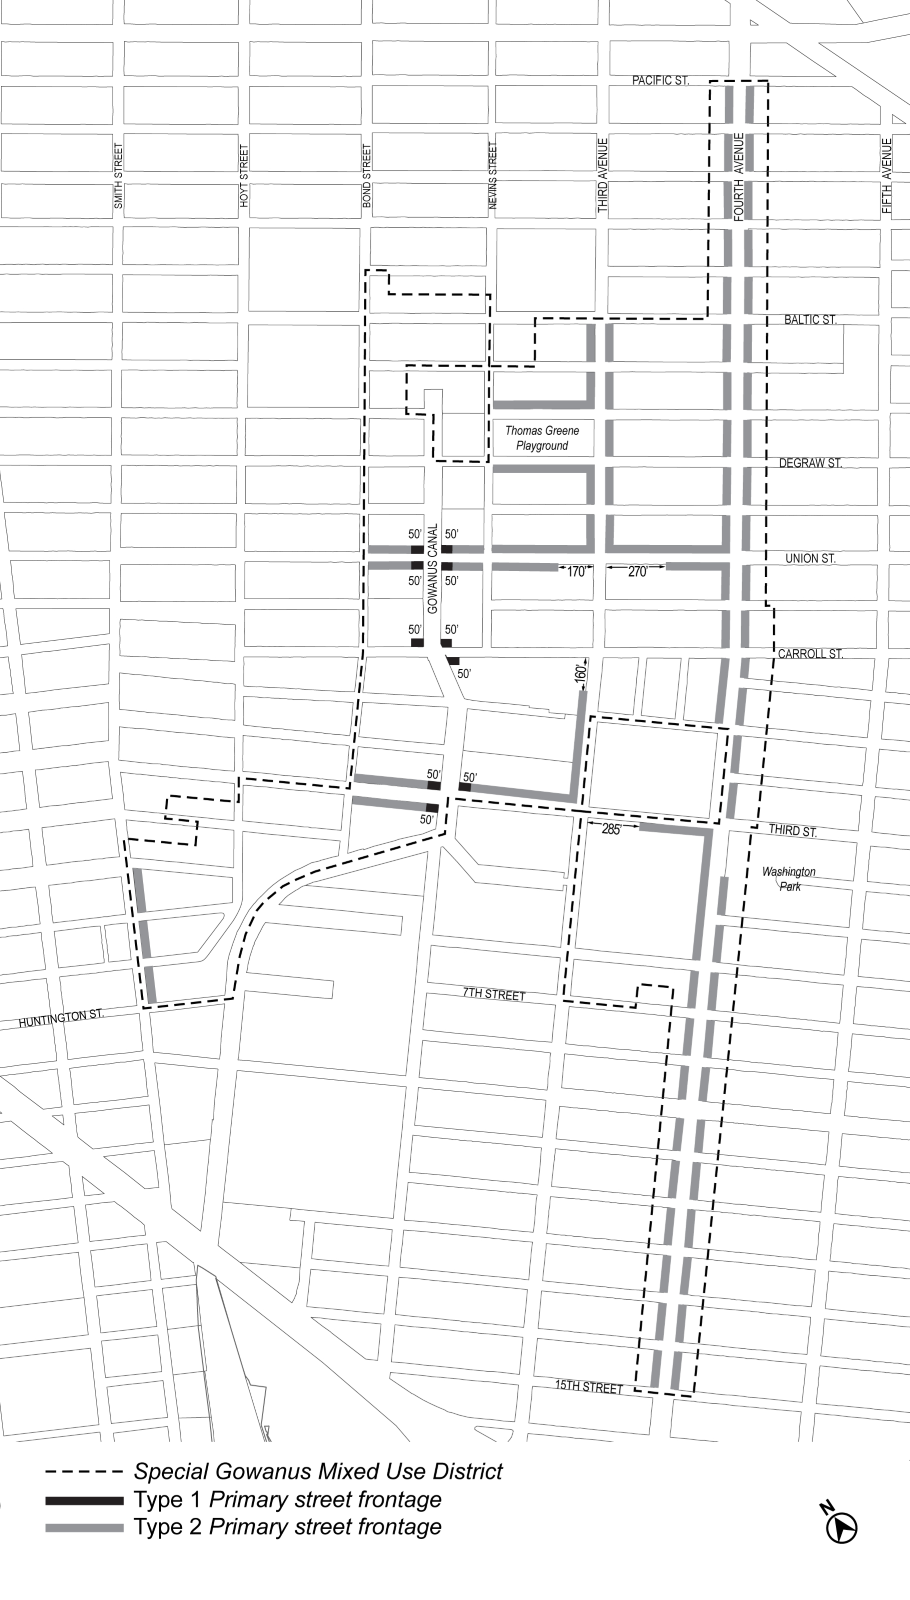 Article XIII Chapter 9_Special Gowanus Mixed Use District, APPENDIX A. 3